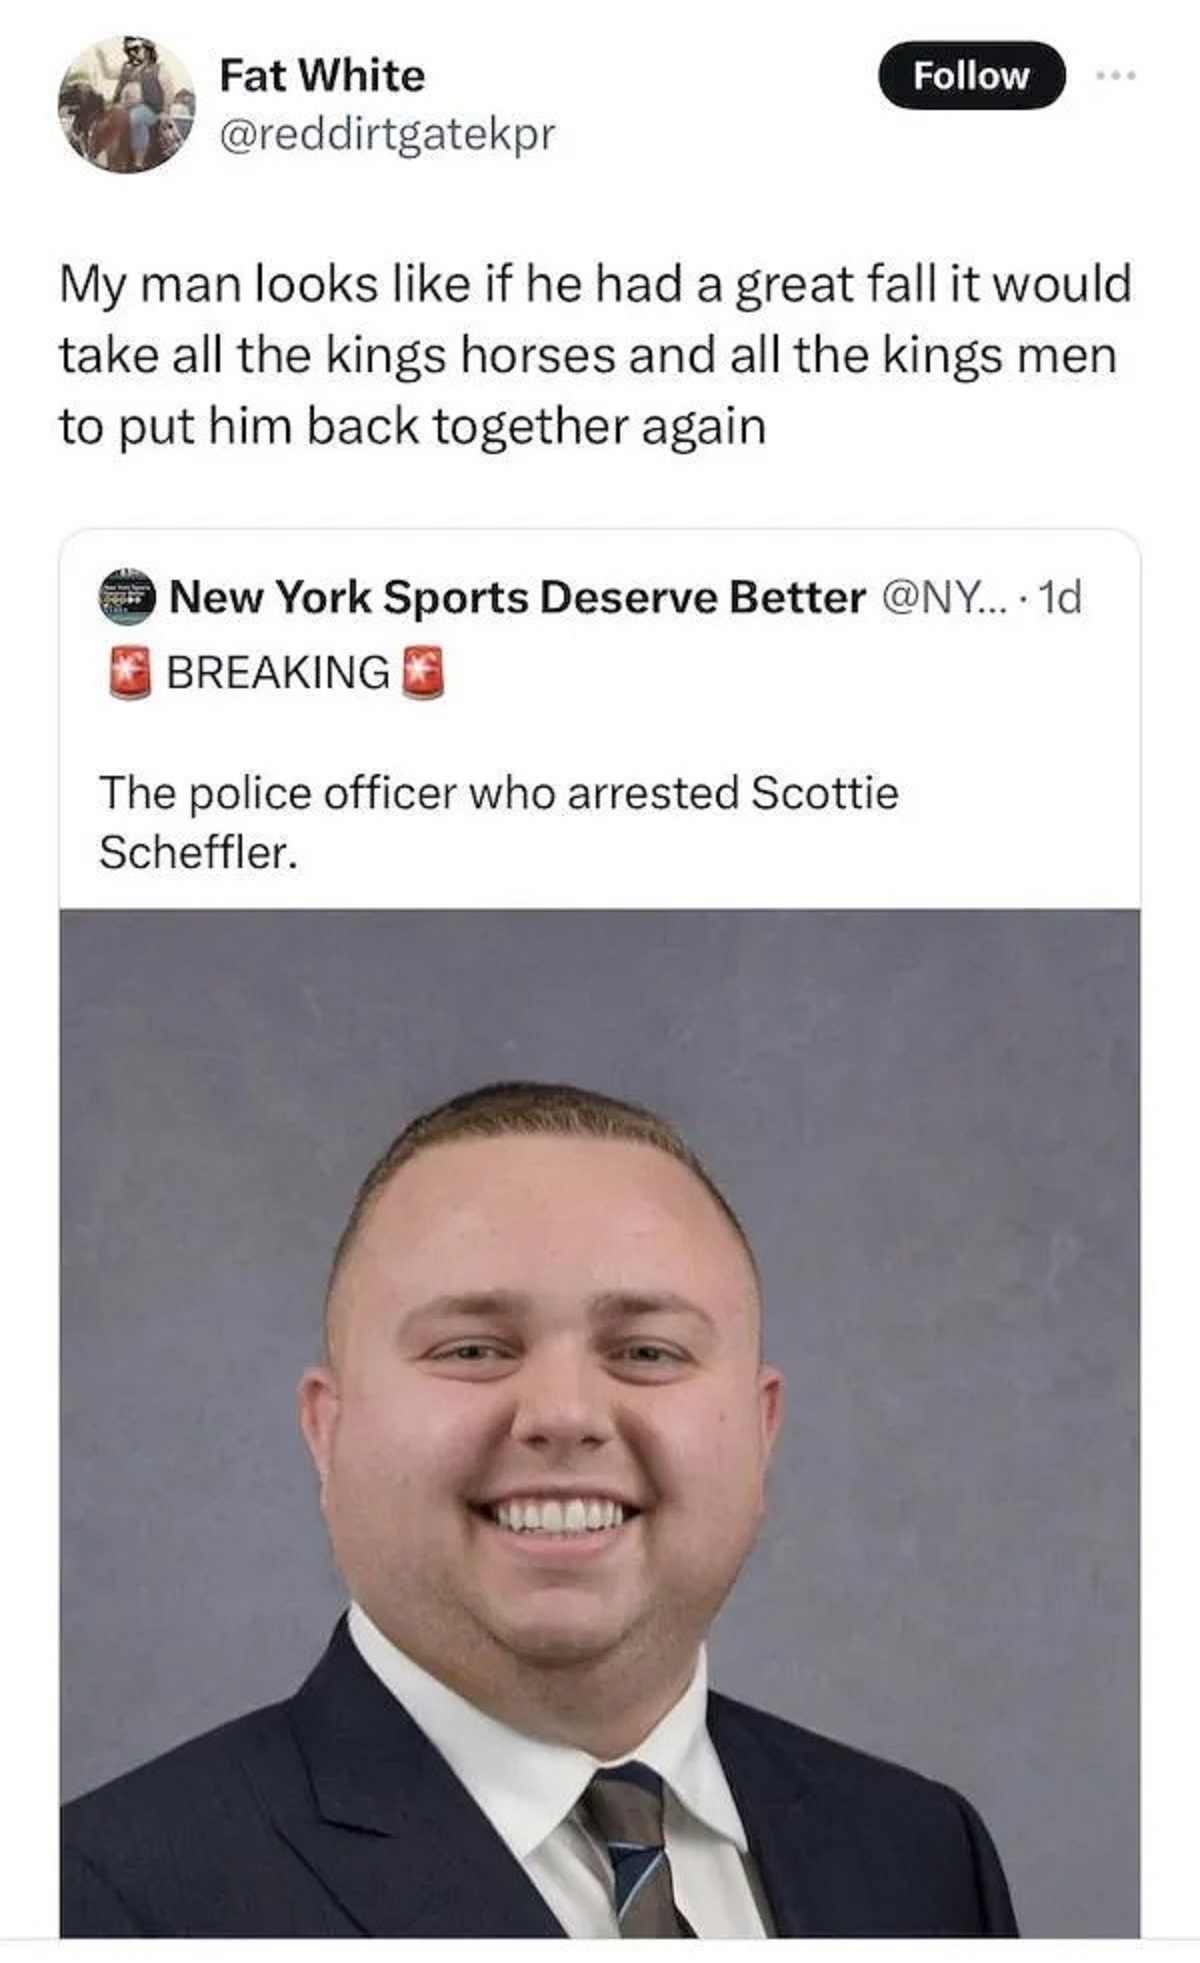 official - Fat White My man looks if he had a great fall it would take all the kings horses and all the kings men to put him back together again New York Sports Deserve Better ... 1d Breaking The police officer who arrested Scottie Scheffler.